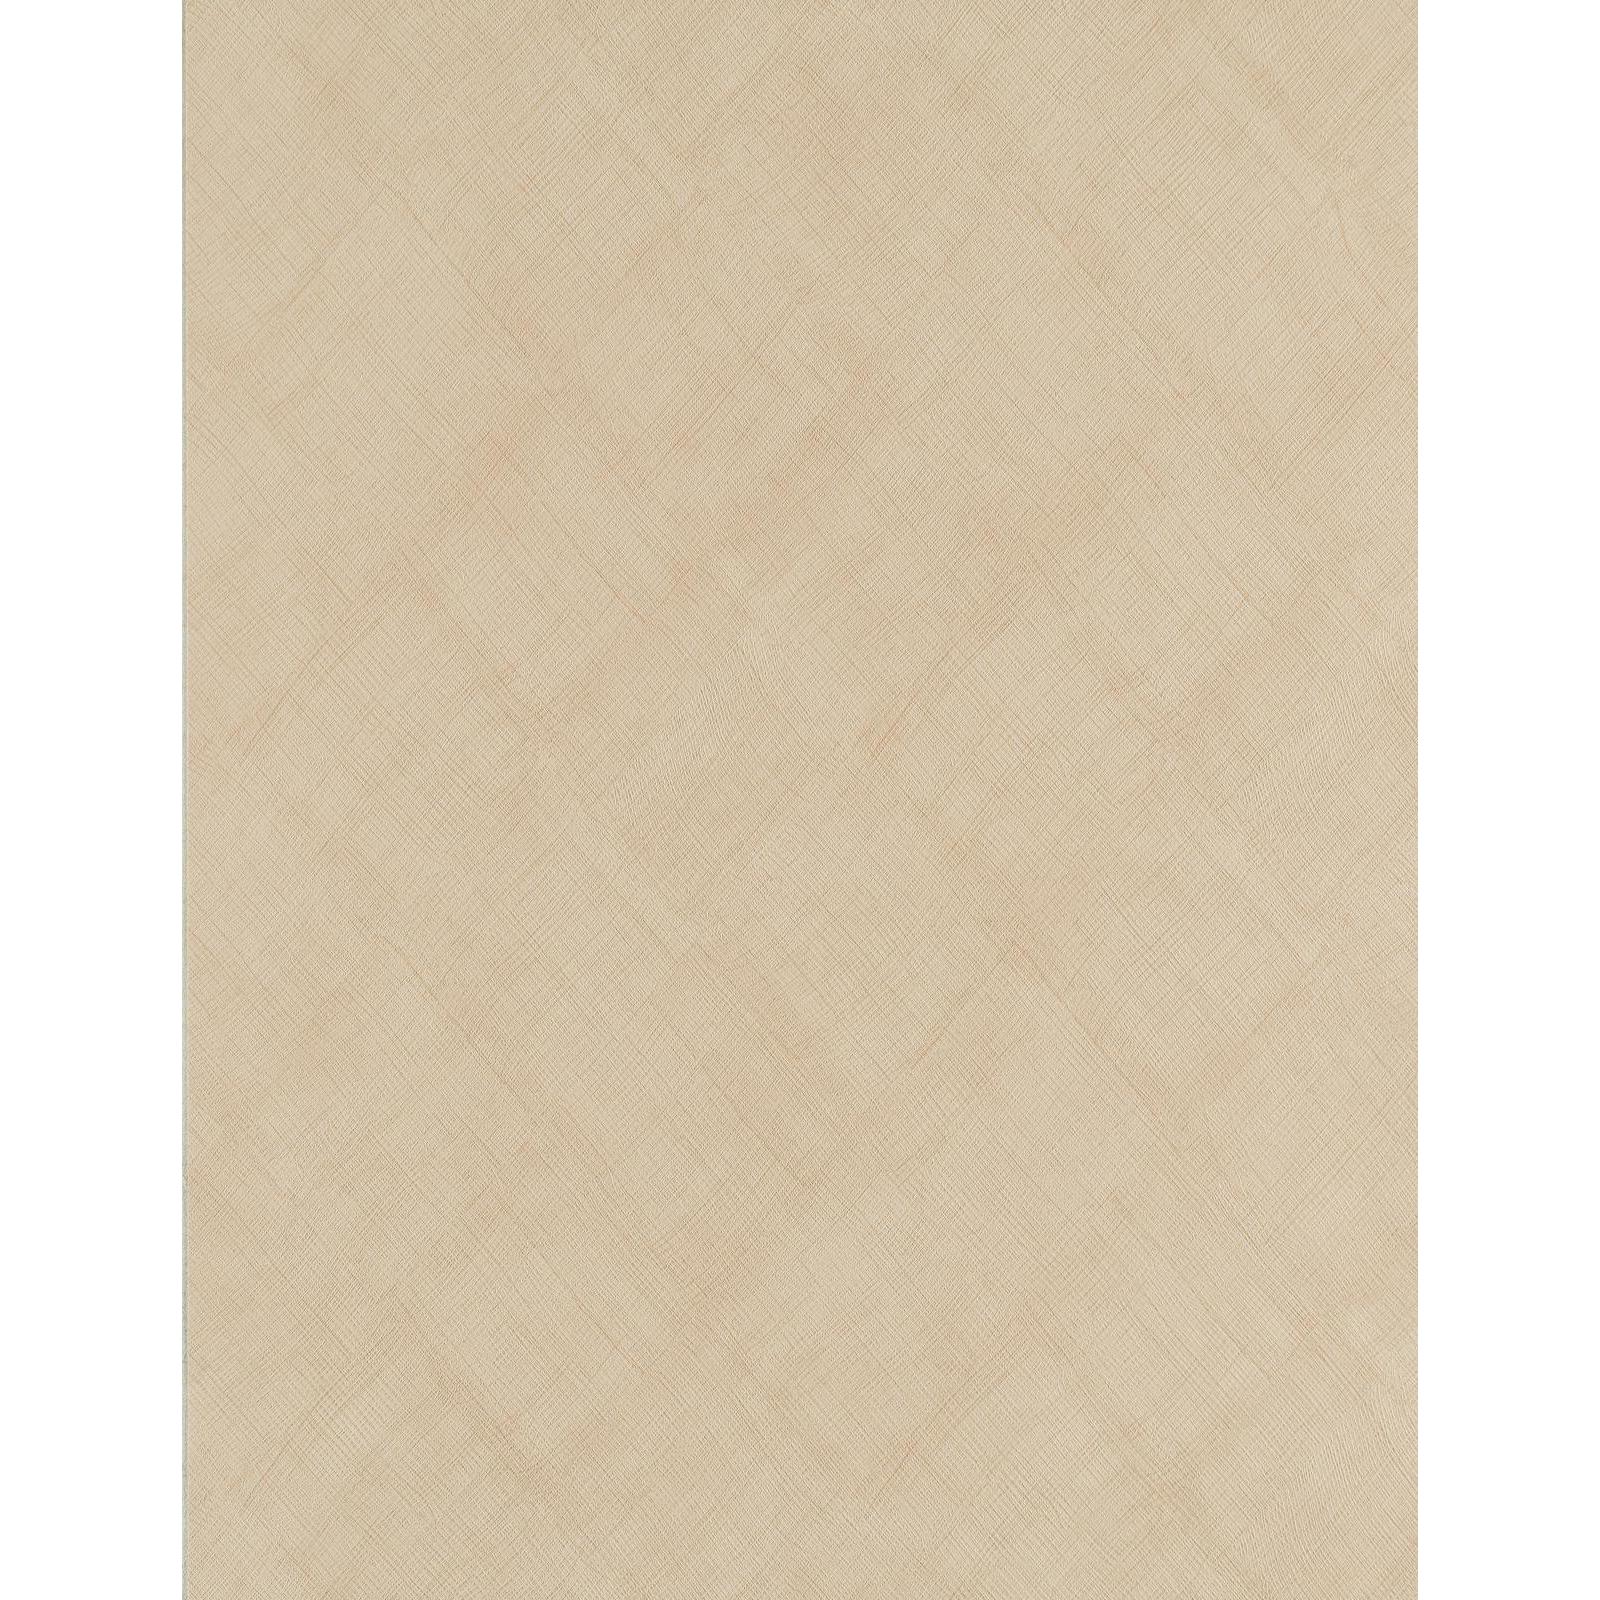 York Wallcoverings Weathered Finishes Burlap Wallpaper